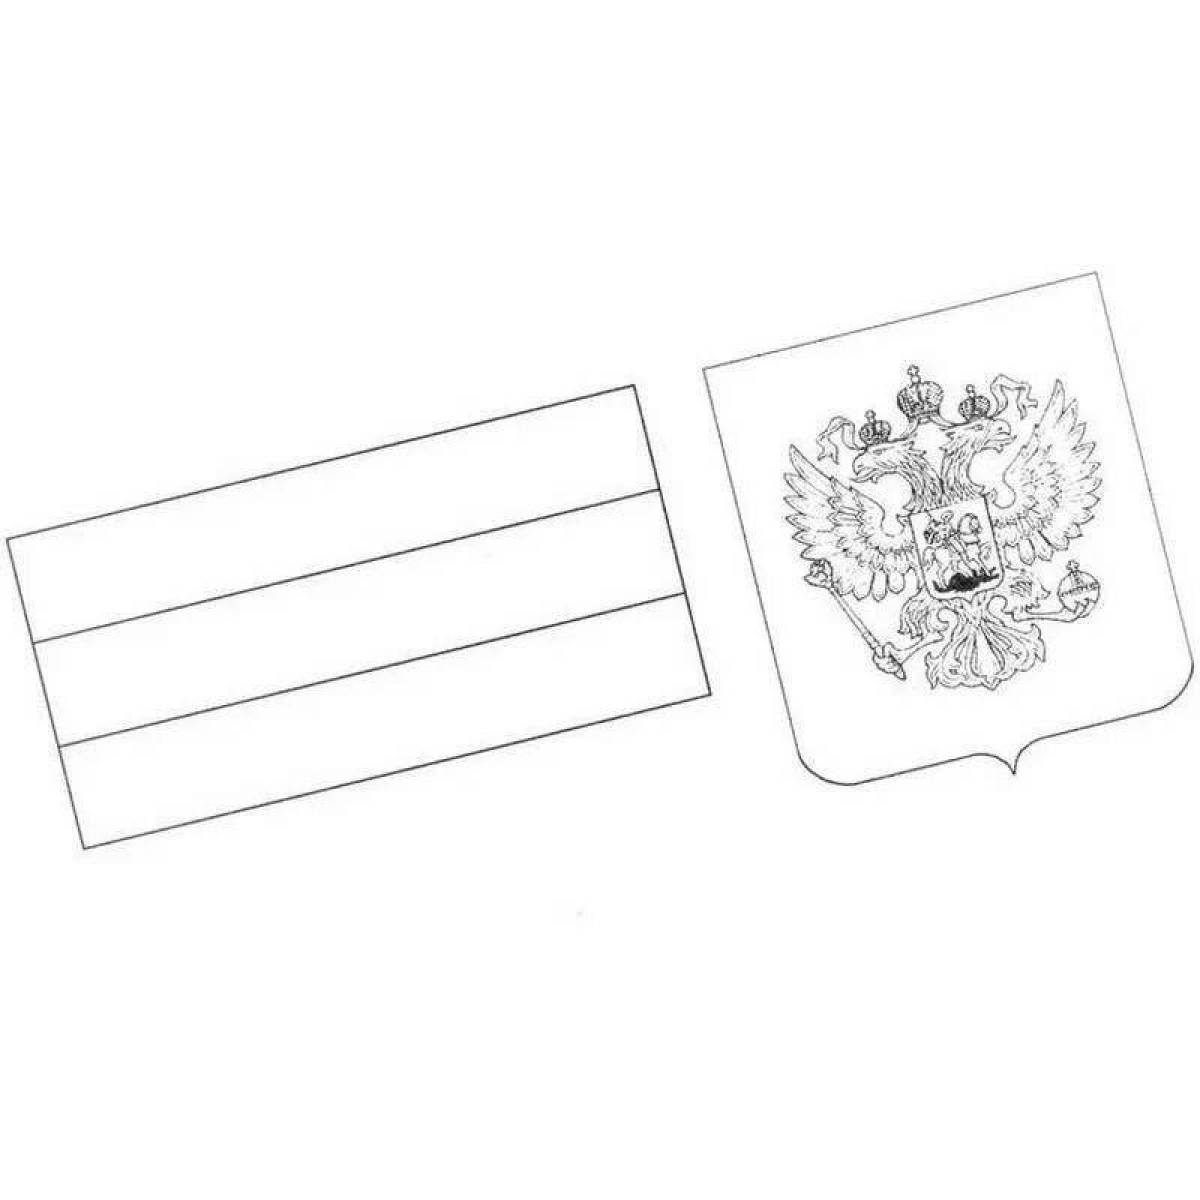 The striking flag and coat of arms of russia